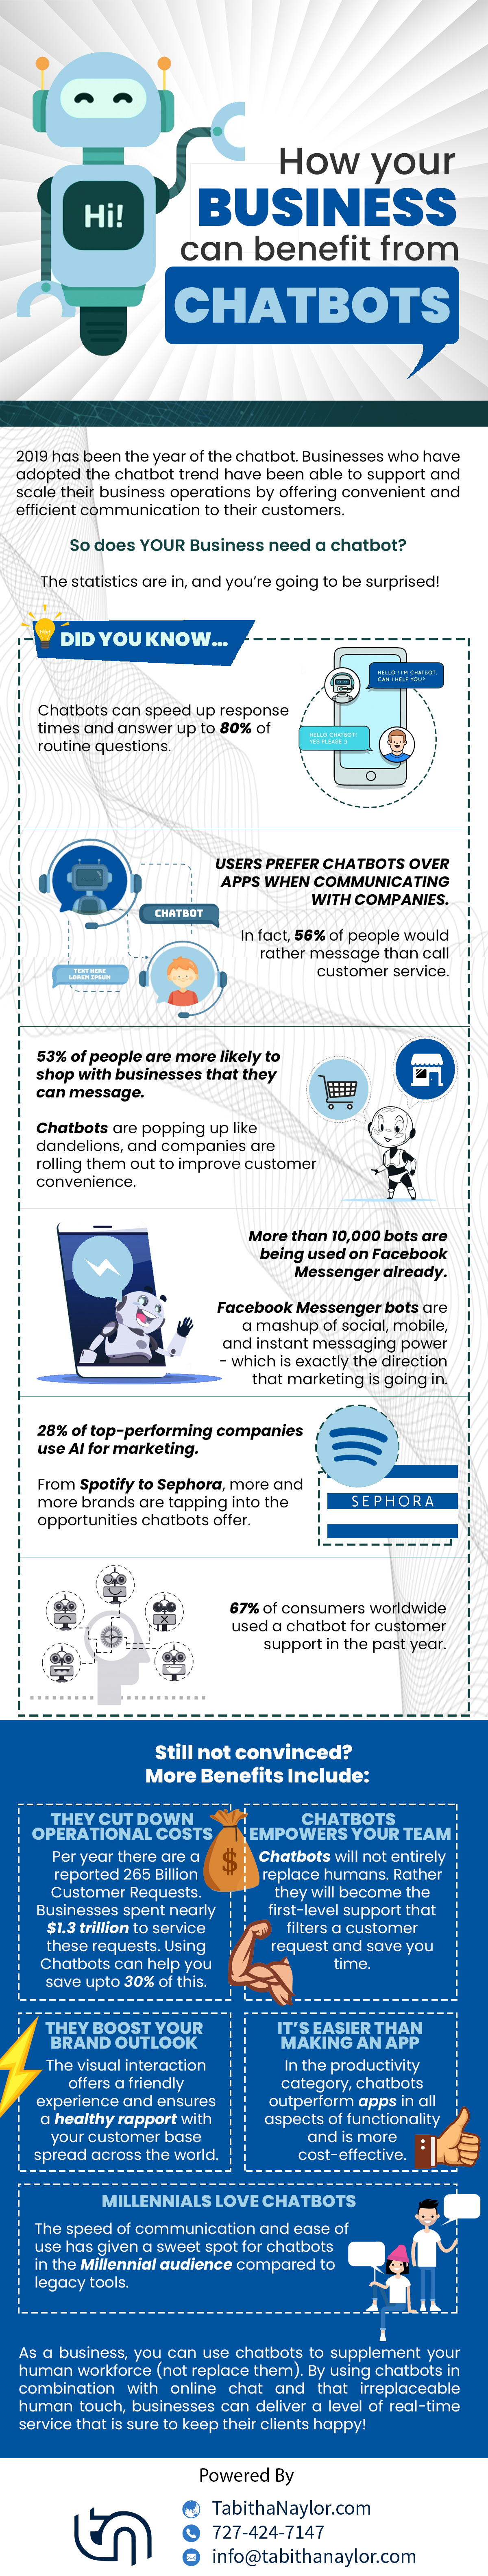 How-your-business-can-benefit-from-Chatbots 